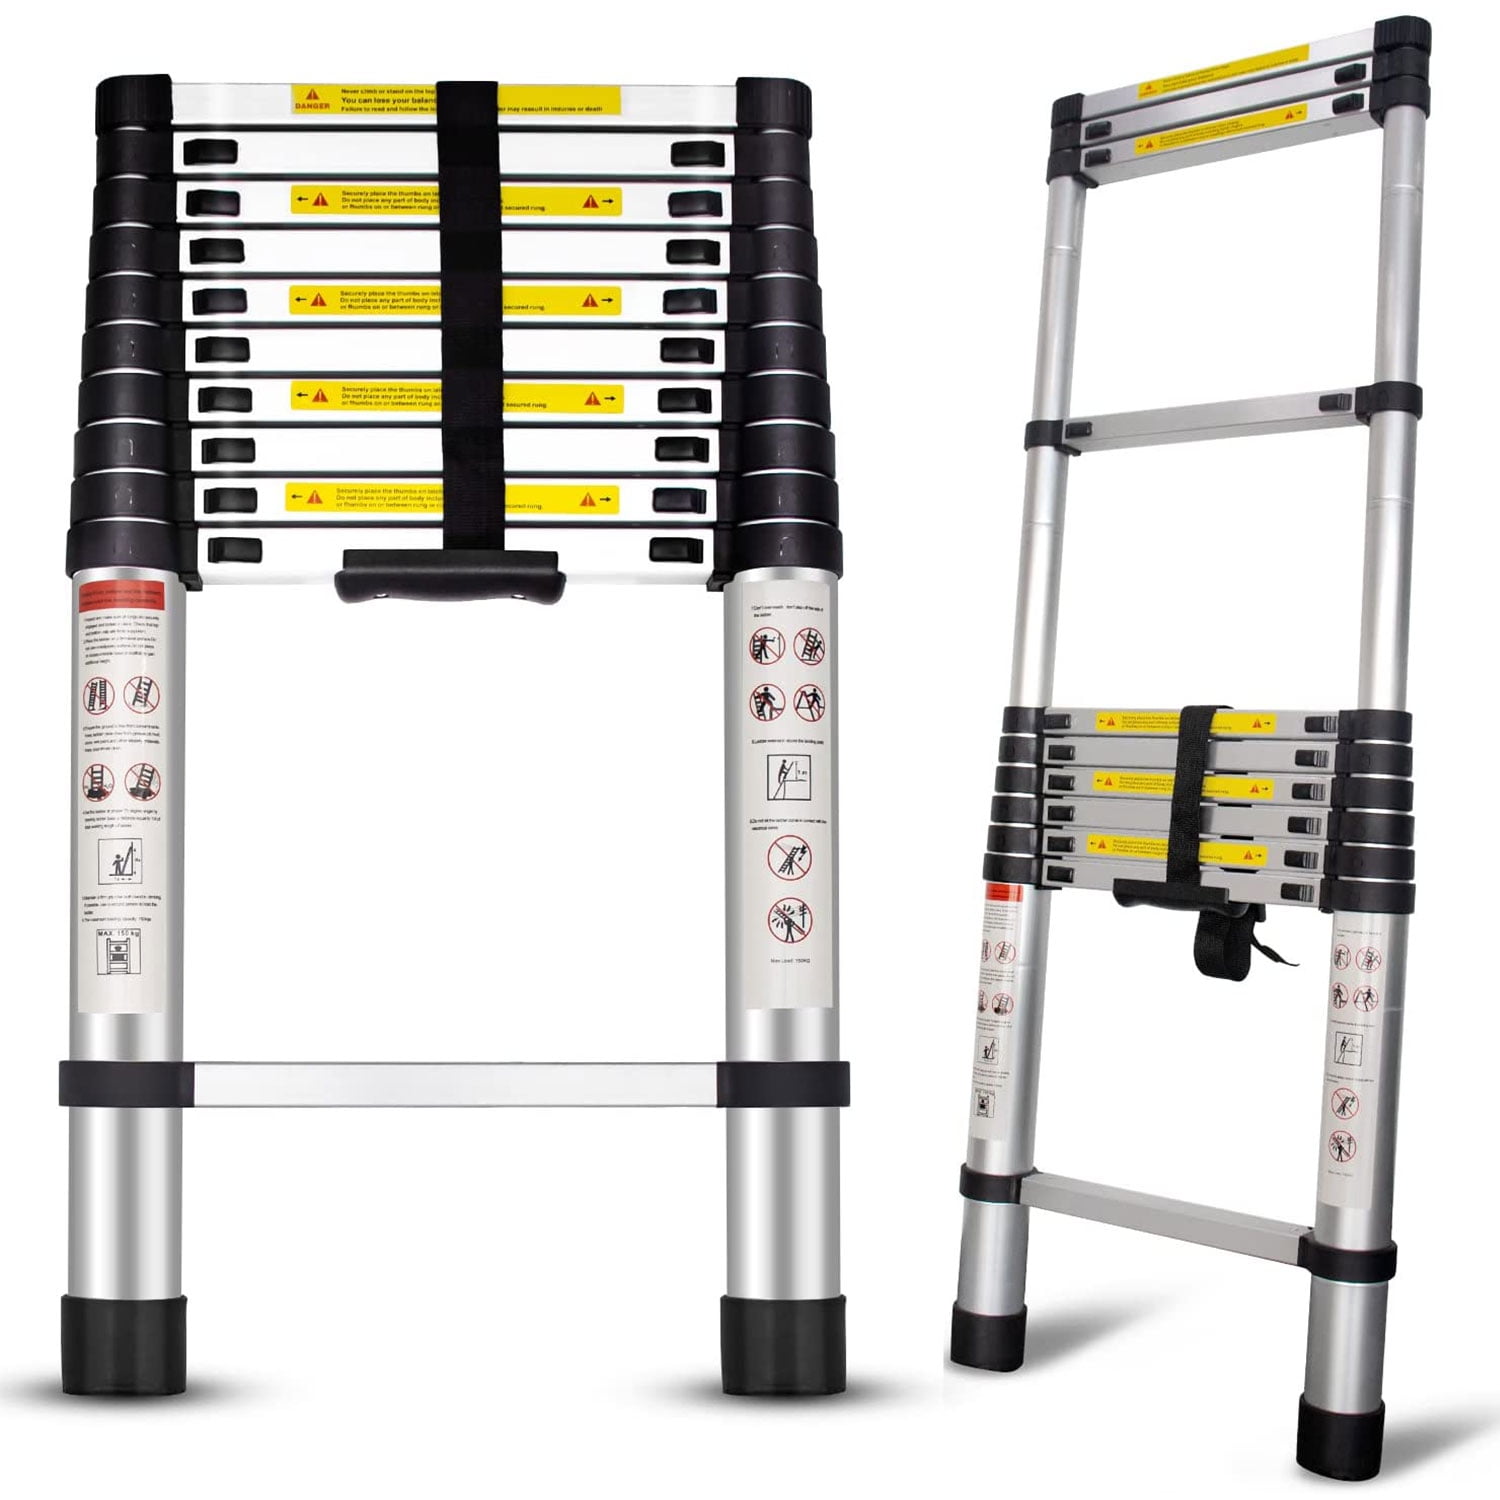 3.8M Extension Extendable Aluminum Telescopic Ladders Heavy Duty Step Ladder New 